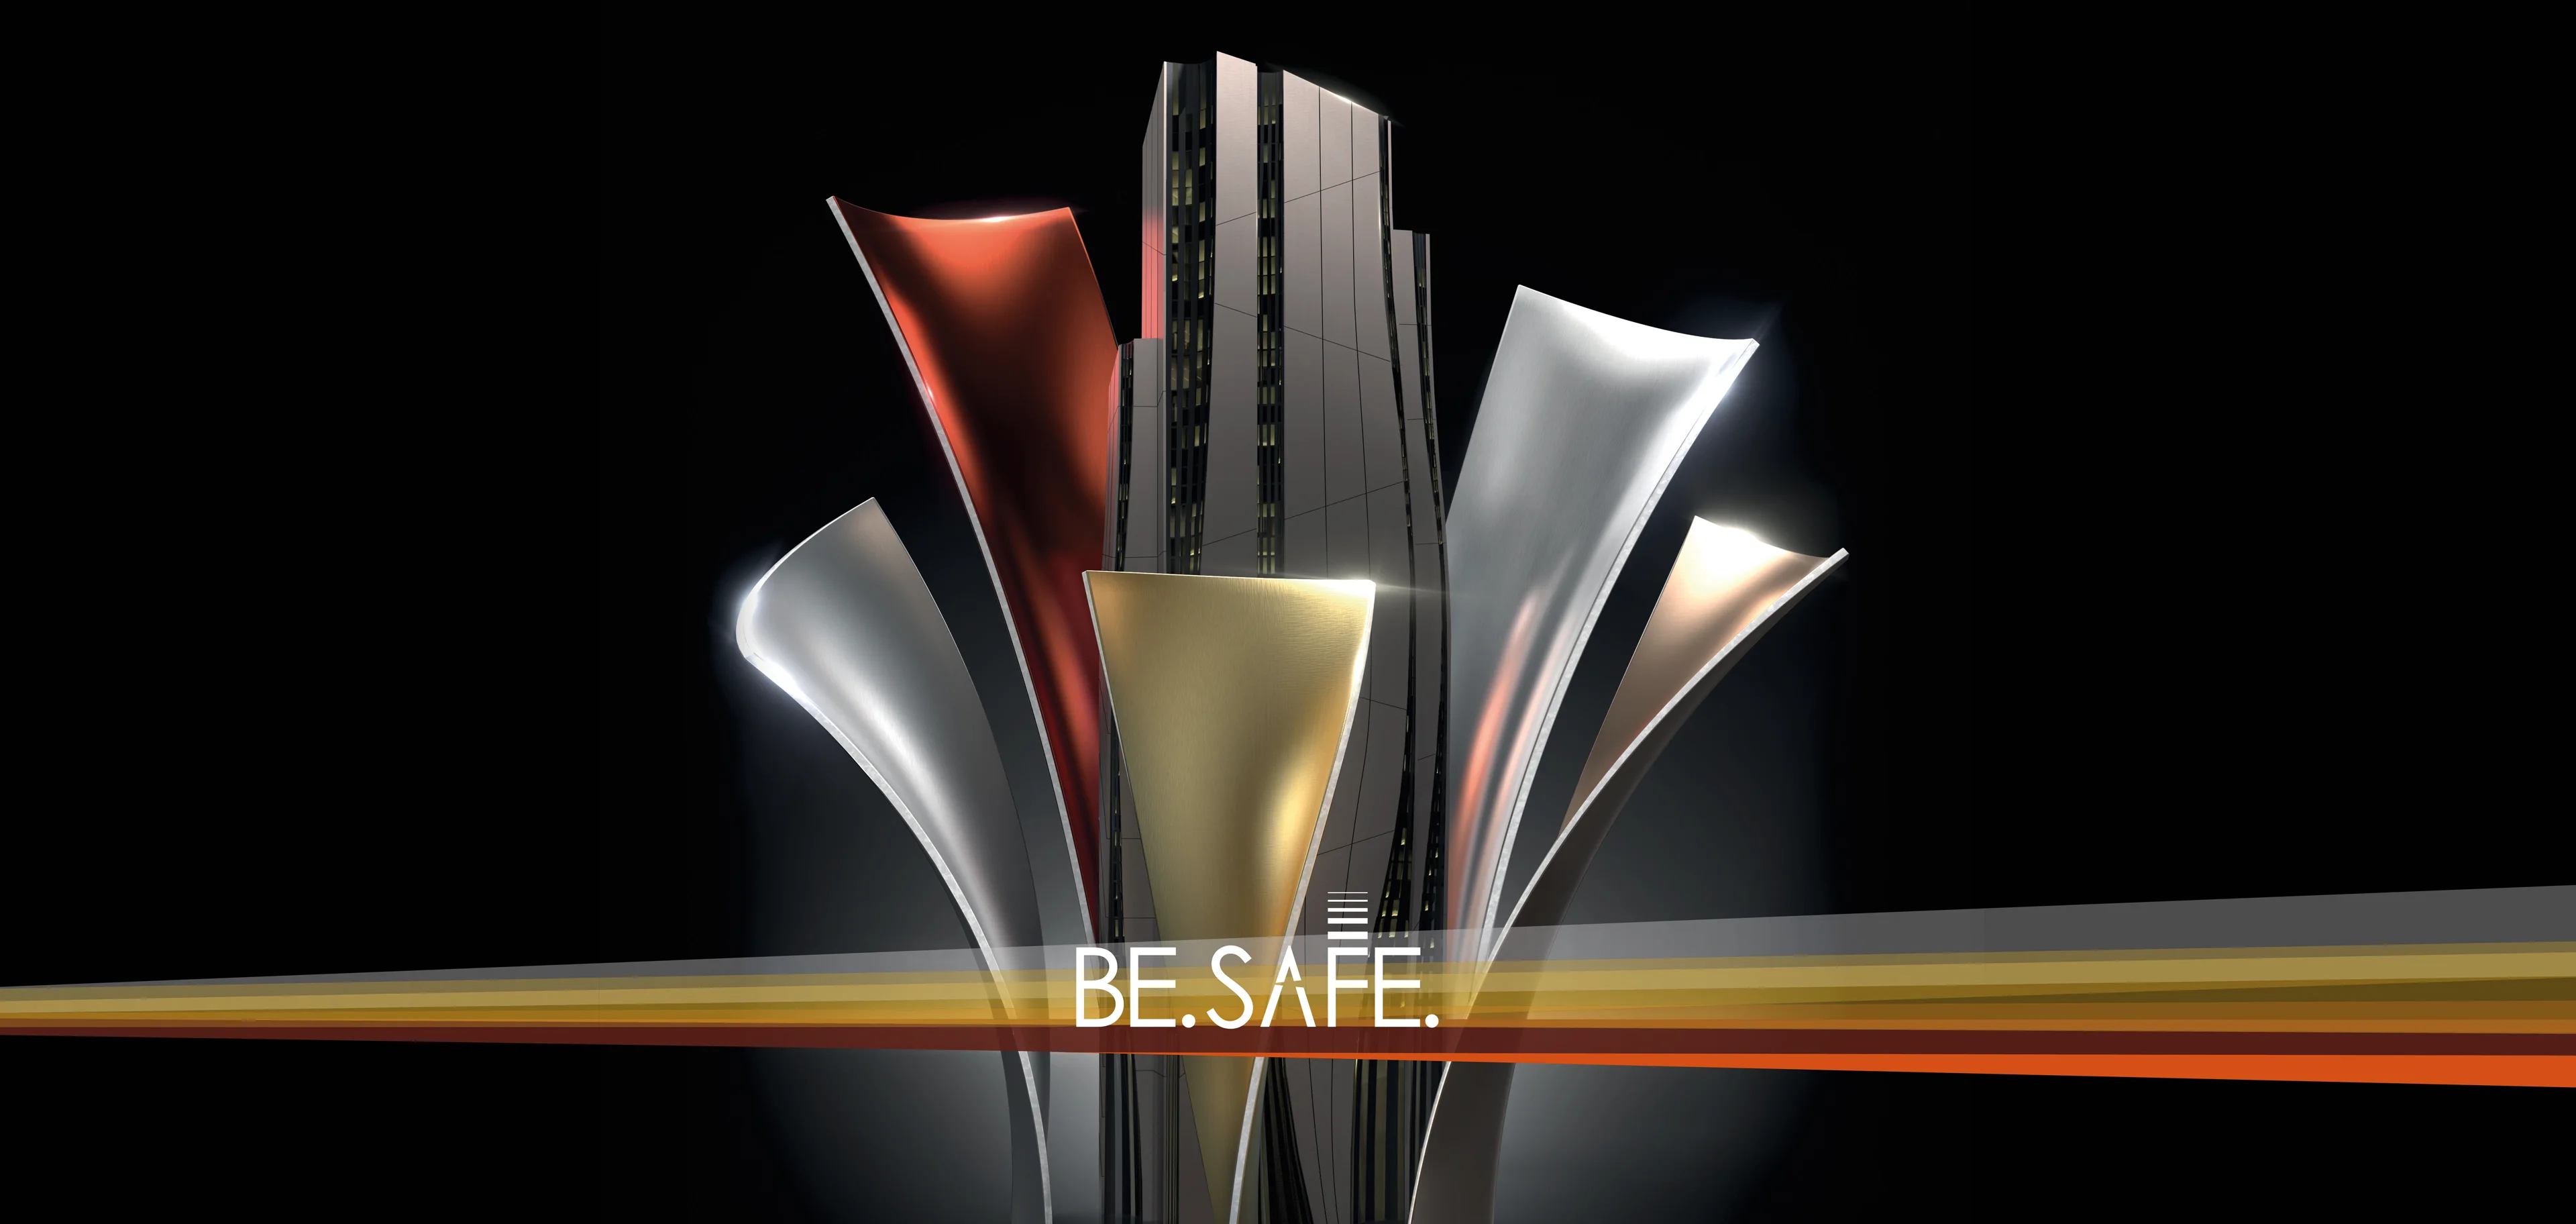 Key visual for the BE.SAFE campaign - digitally processed motif in which a high-rise building is surrounded by aluminium composite panels in various colours.